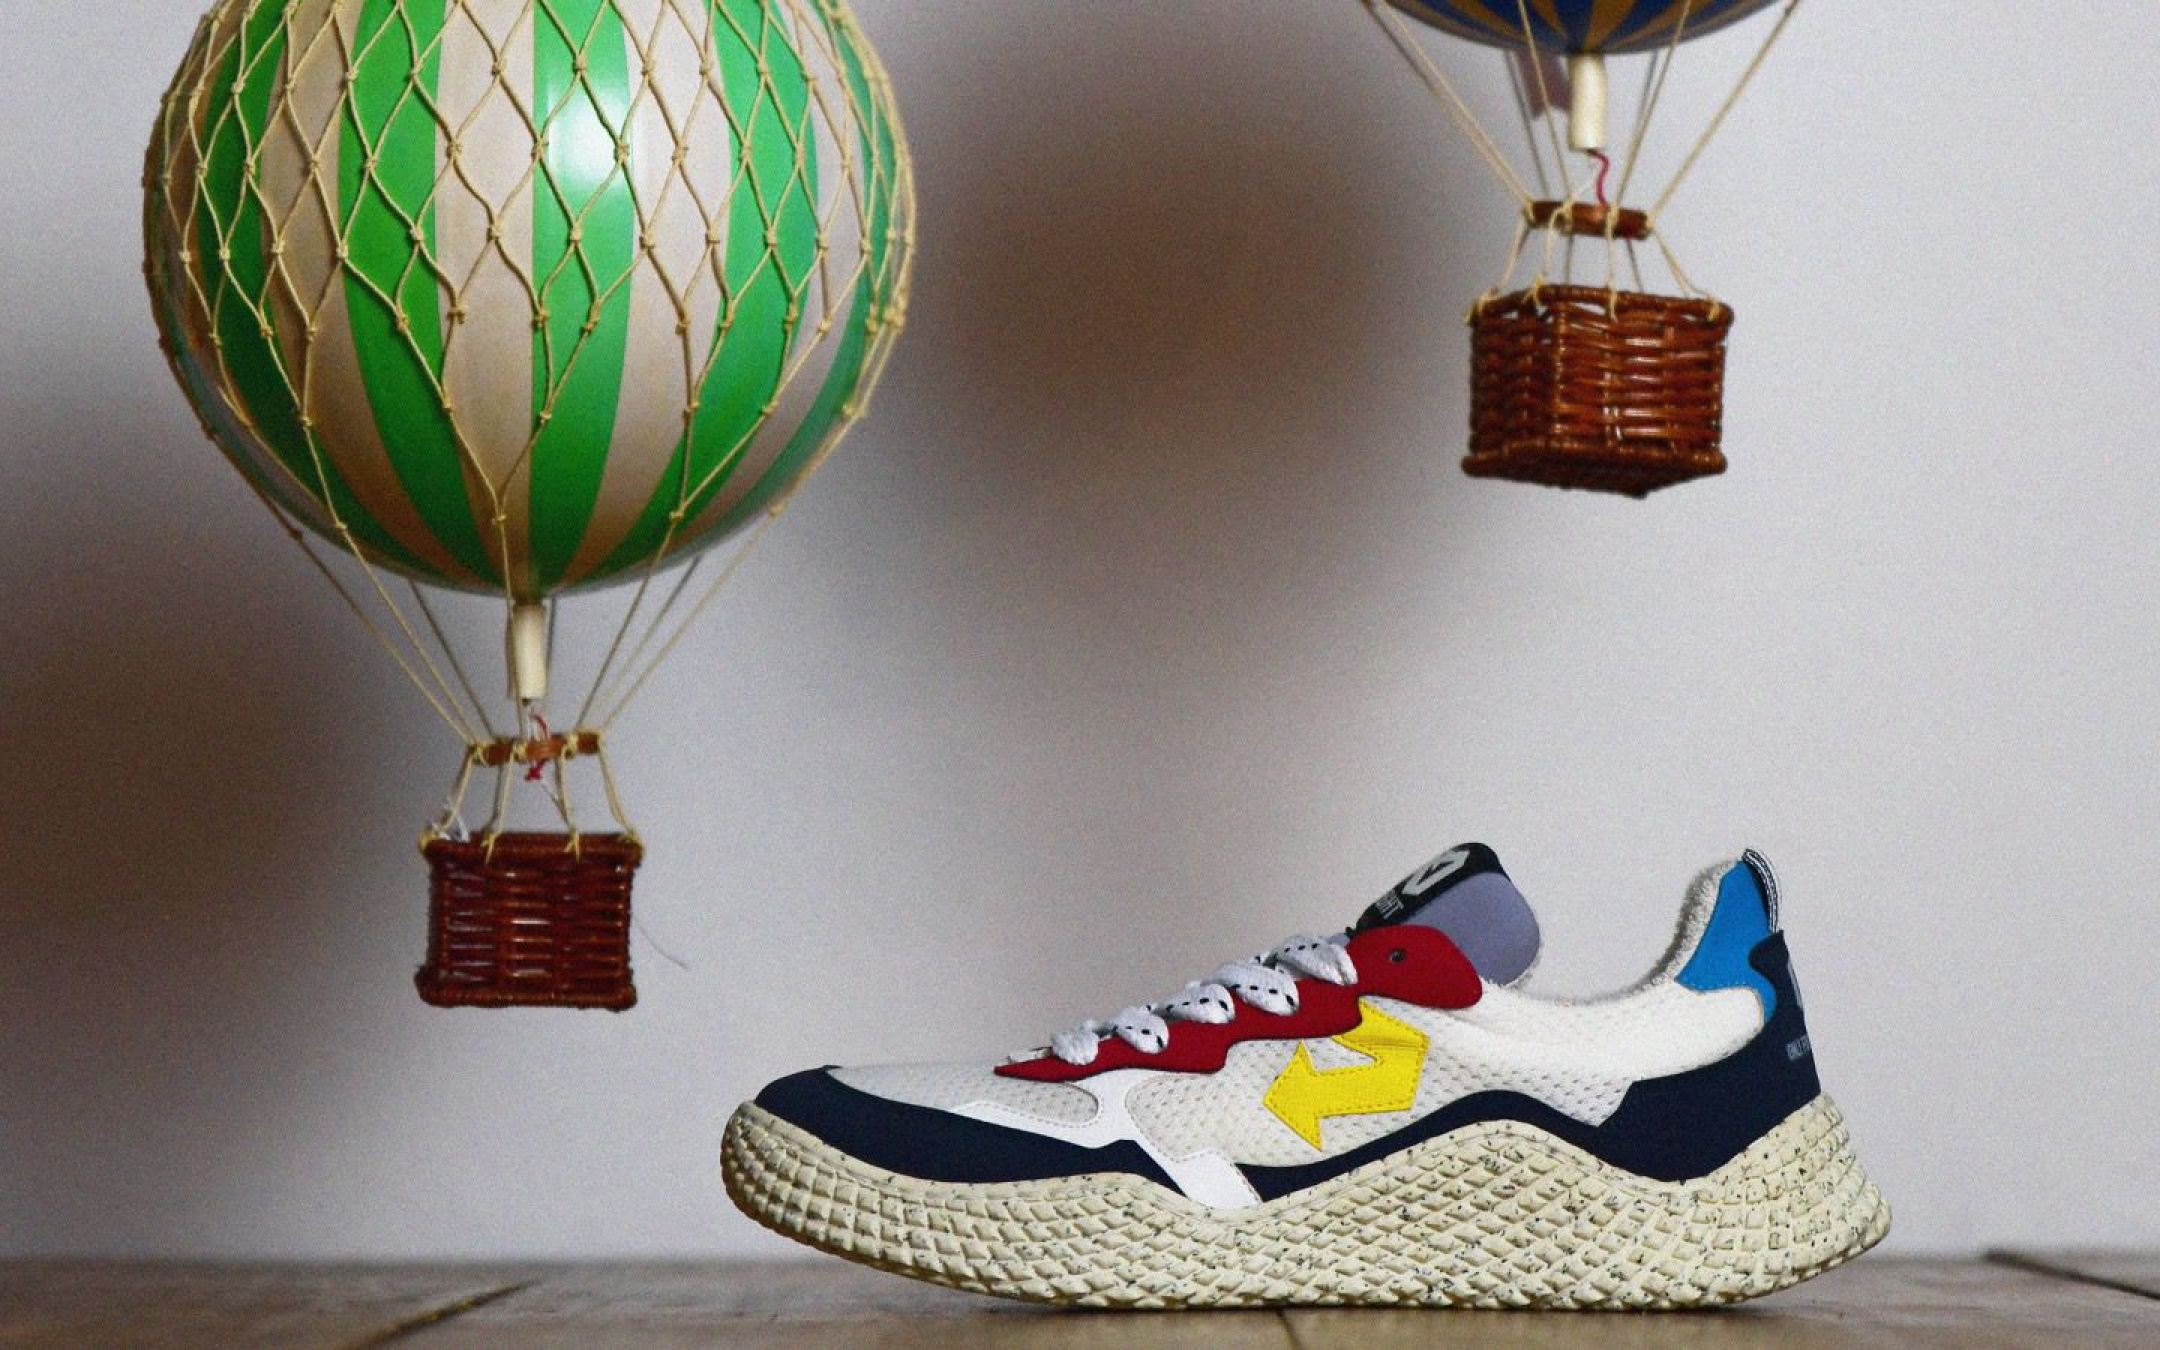 Sustainable sneakers